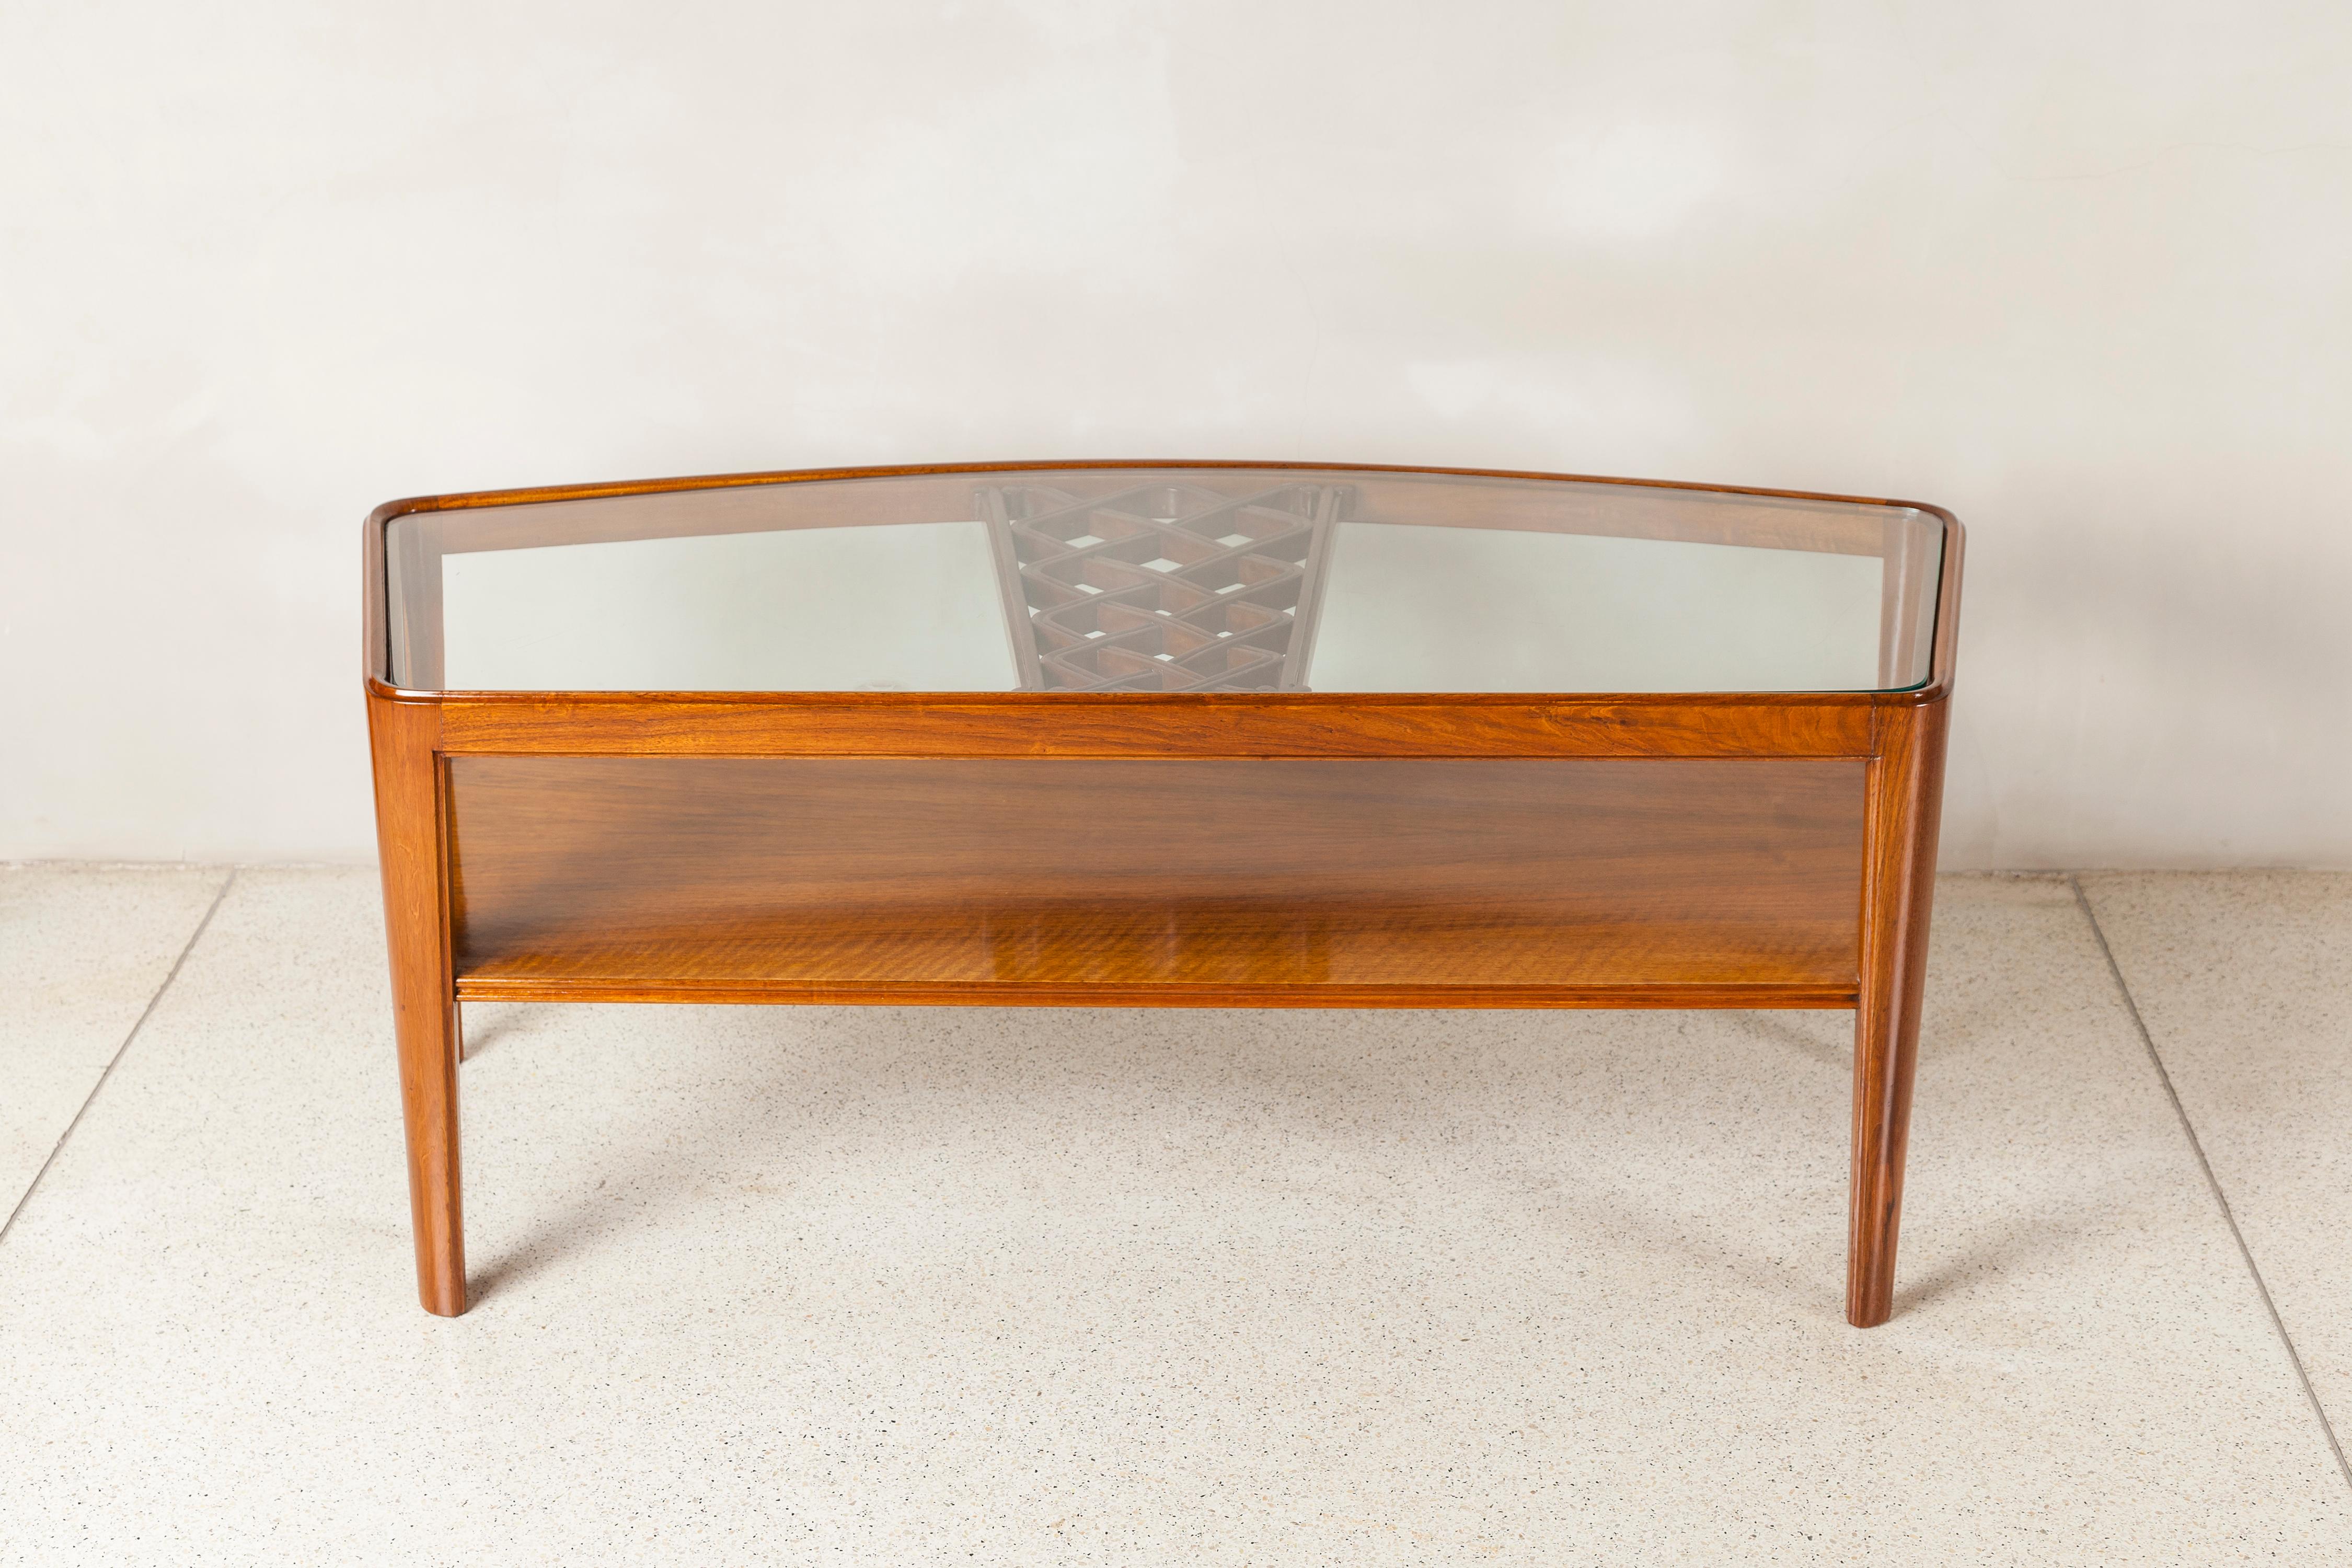 Wood and glass low table by Englander & Bonta, Argentina, circa 1950.